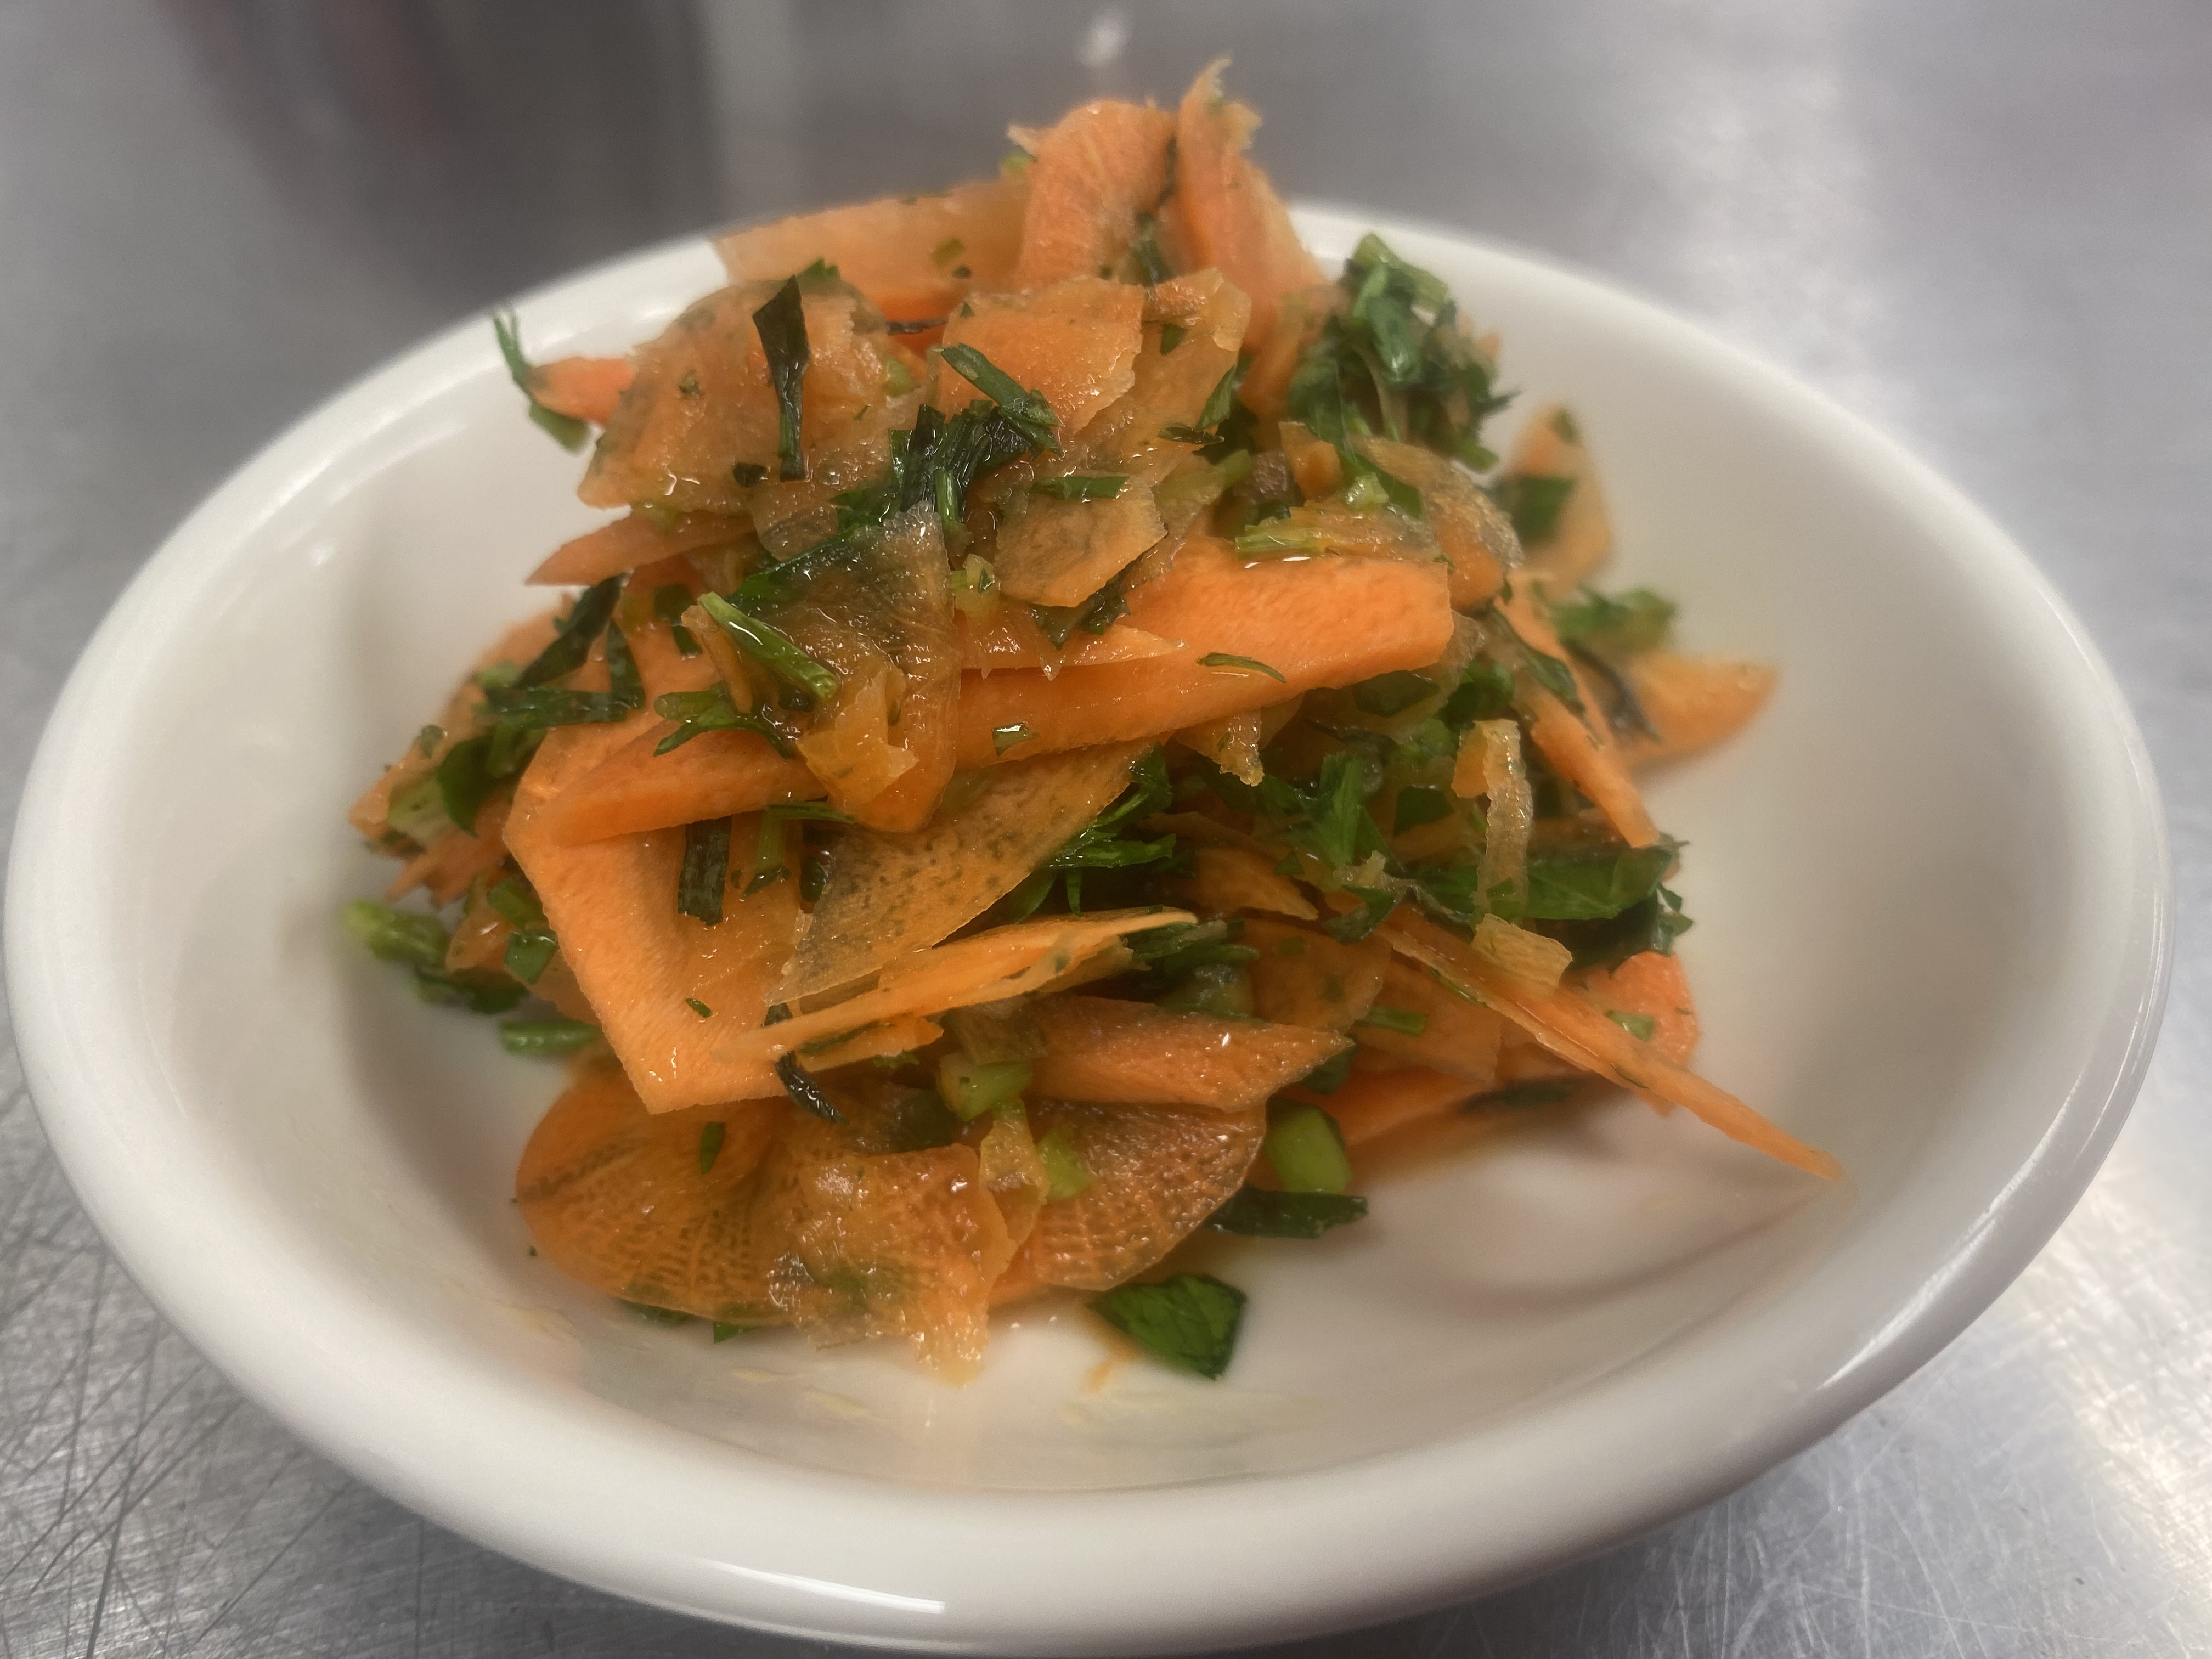 Carrot and Herbs Salad